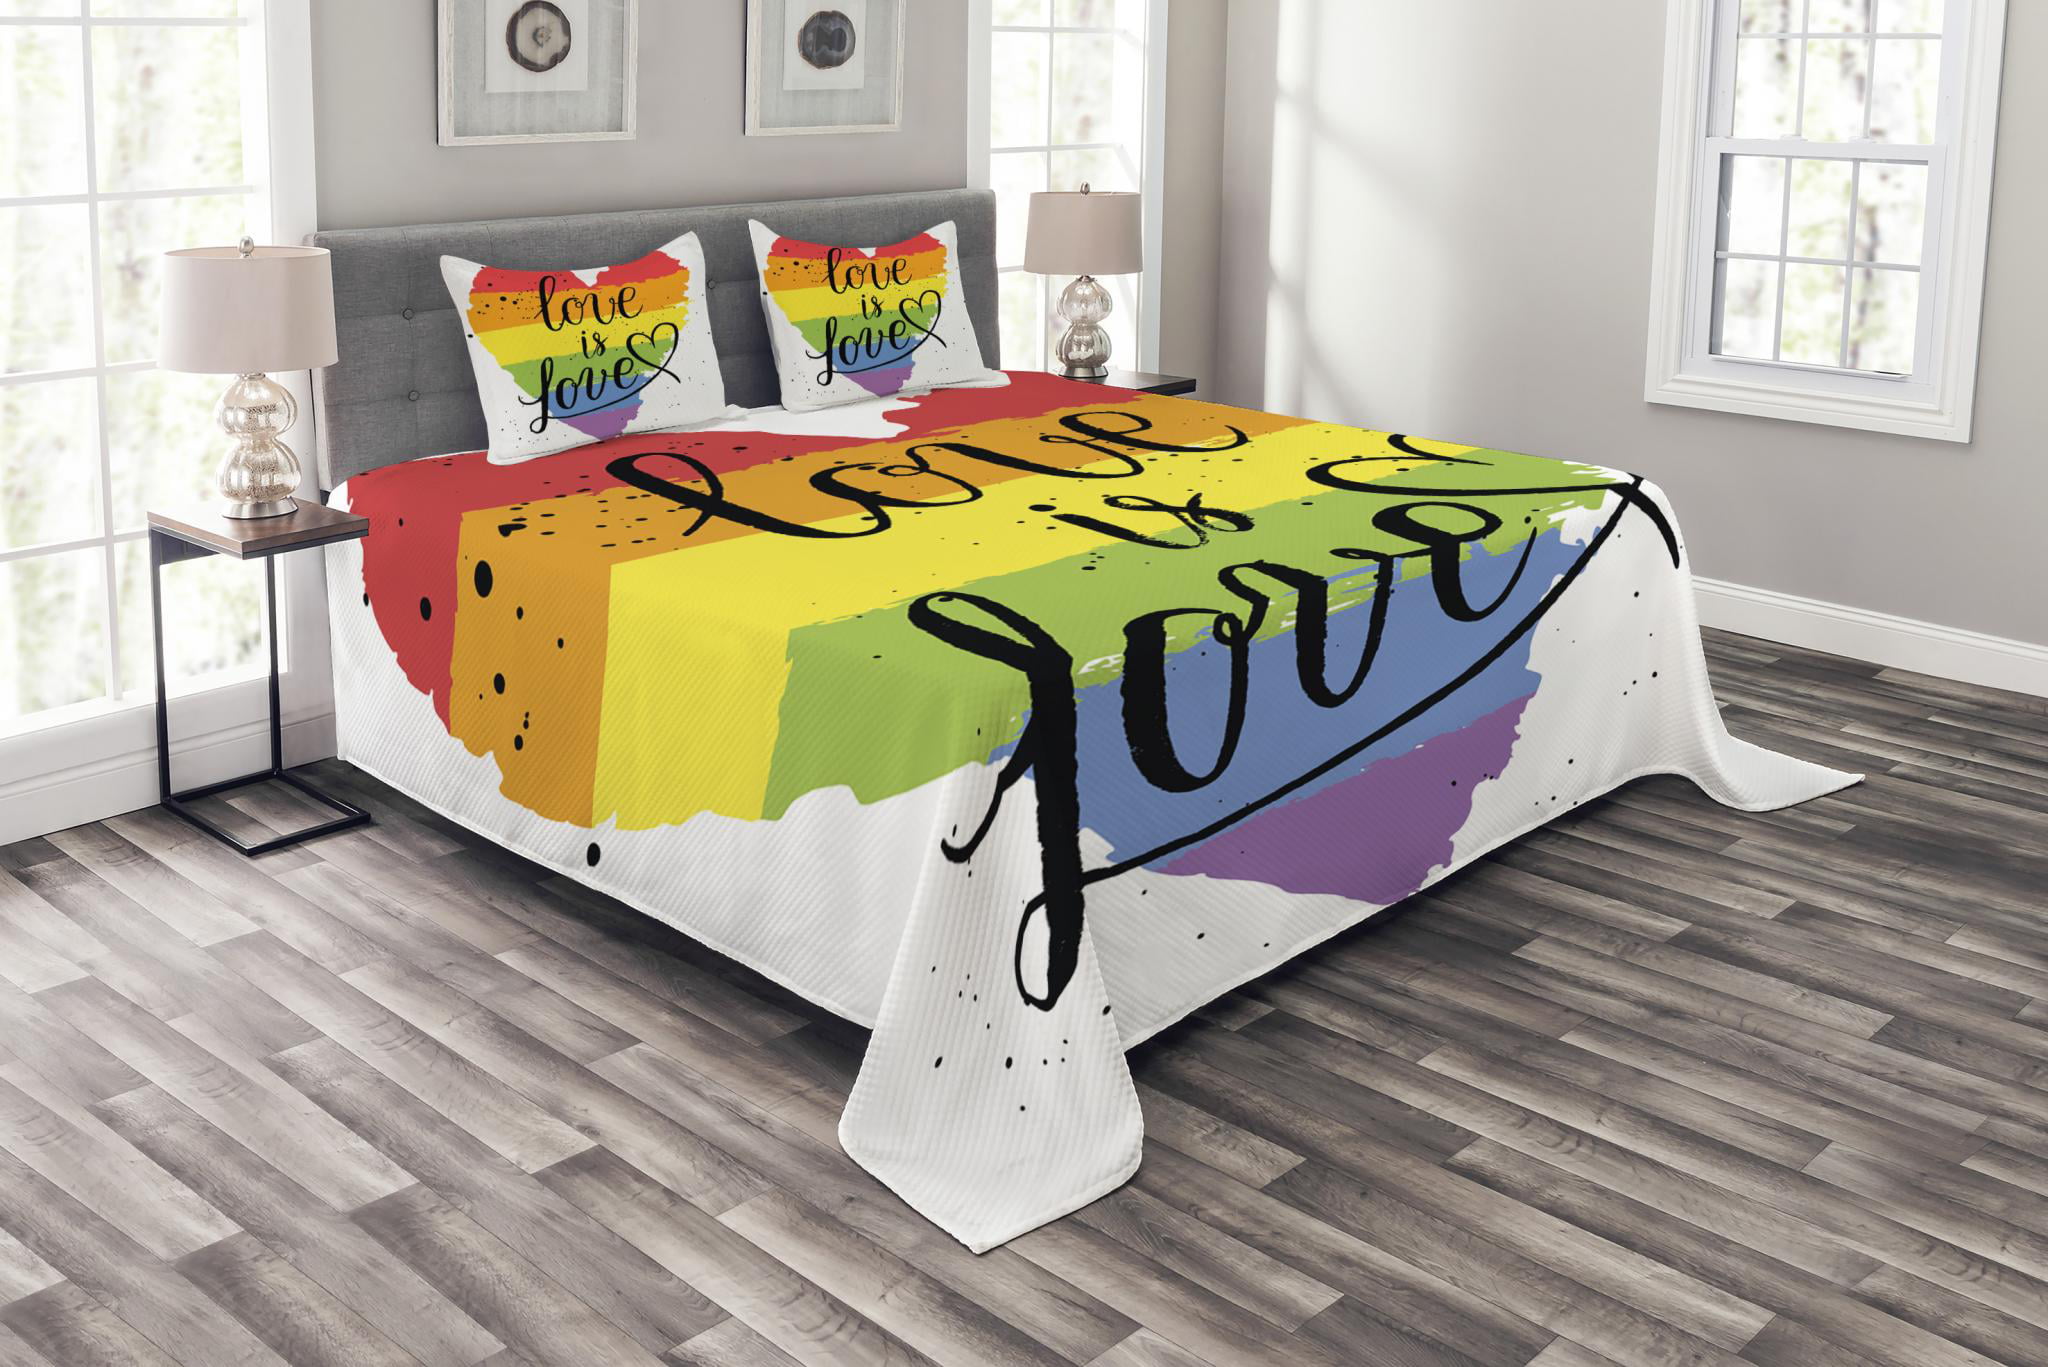 Details about   Pride Quilted Bedspread & Pillow Shams Set Love Wins Tie Dye Effect Print 